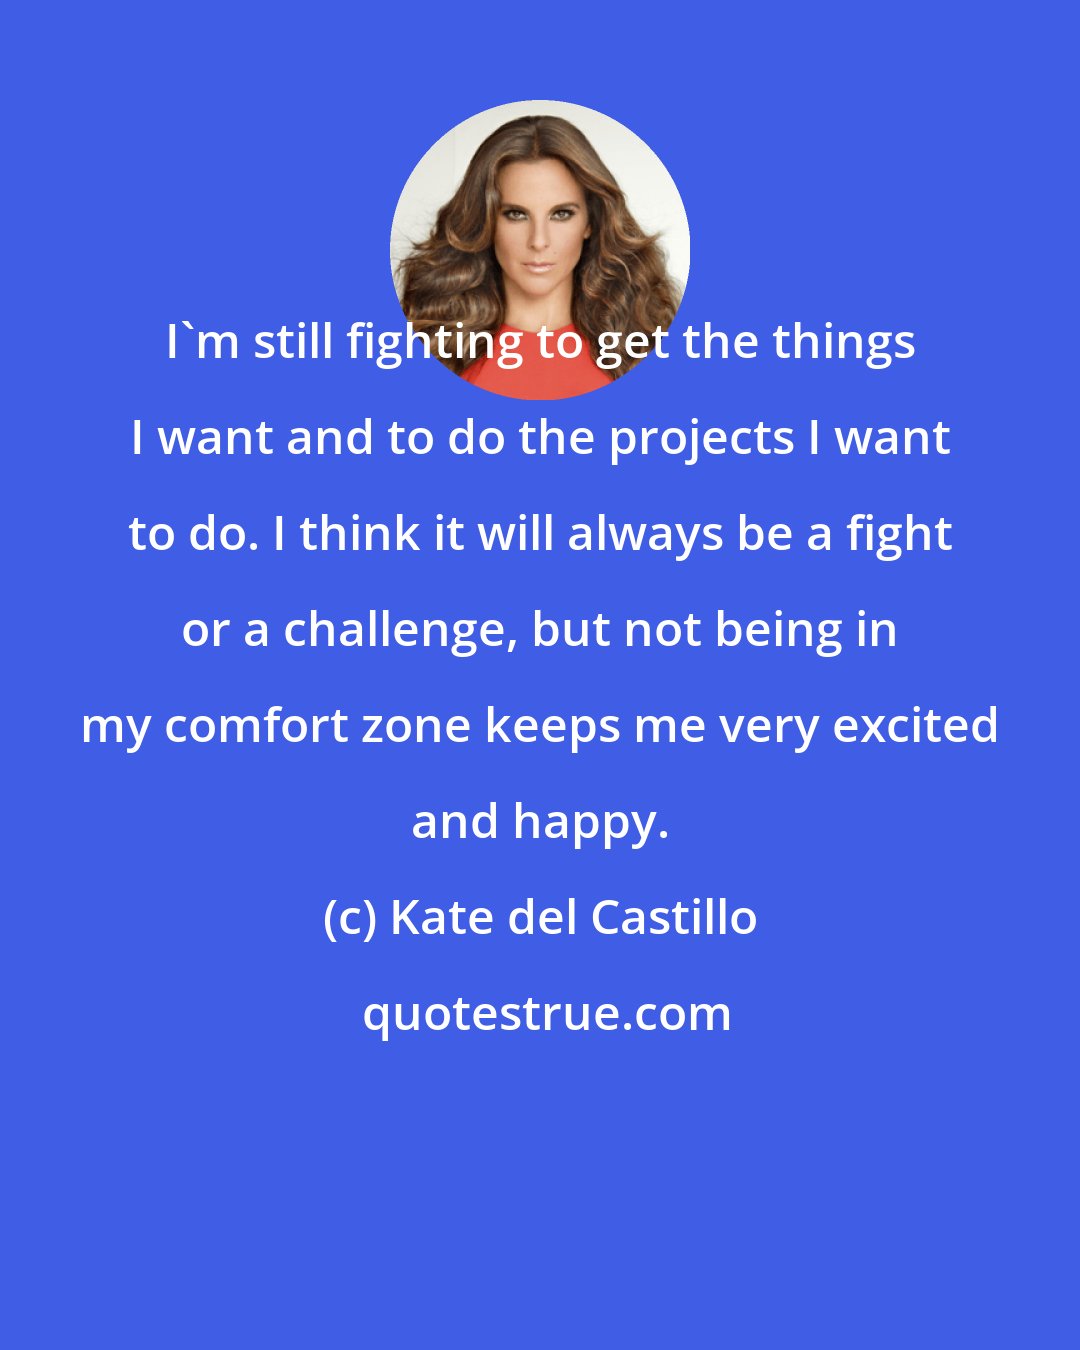 Kate del Castillo: I'm still fighting to get the things I want and to do the projects I want to do. I think it will always be a fight or a challenge, but not being in my comfort zone keeps me very excited and happy.